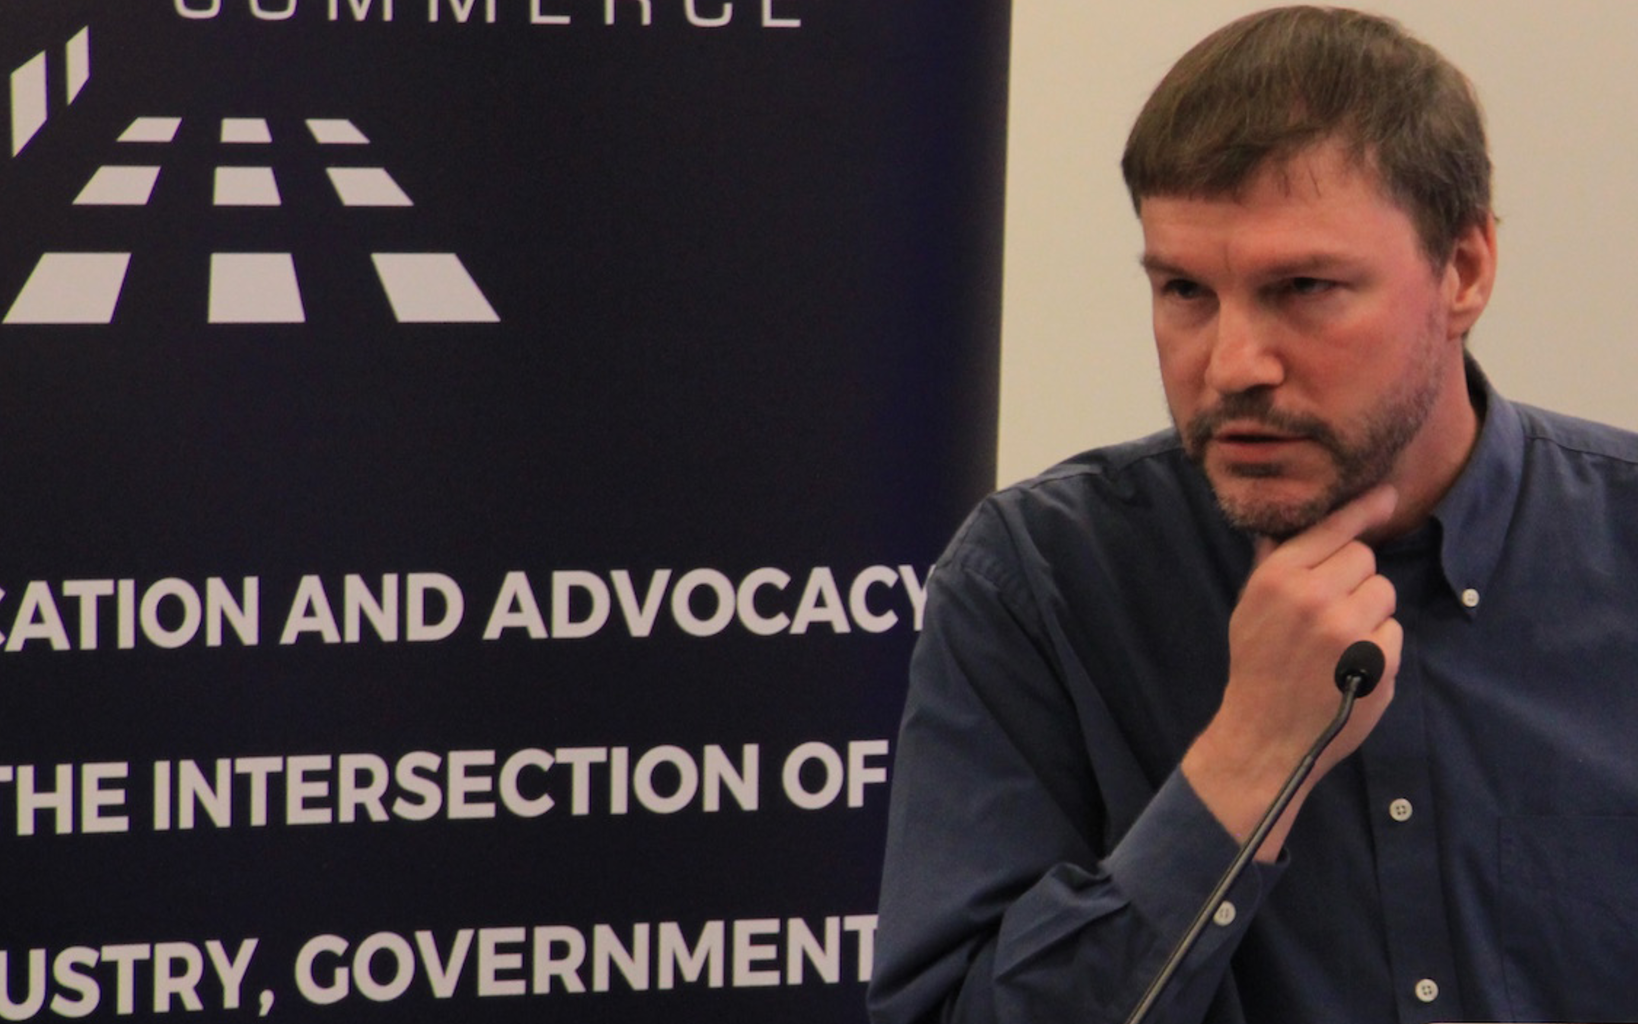 Relax Lawyers, Nick Szabo Says Smart Contracts Won't Kill Jobs - CoinDesk